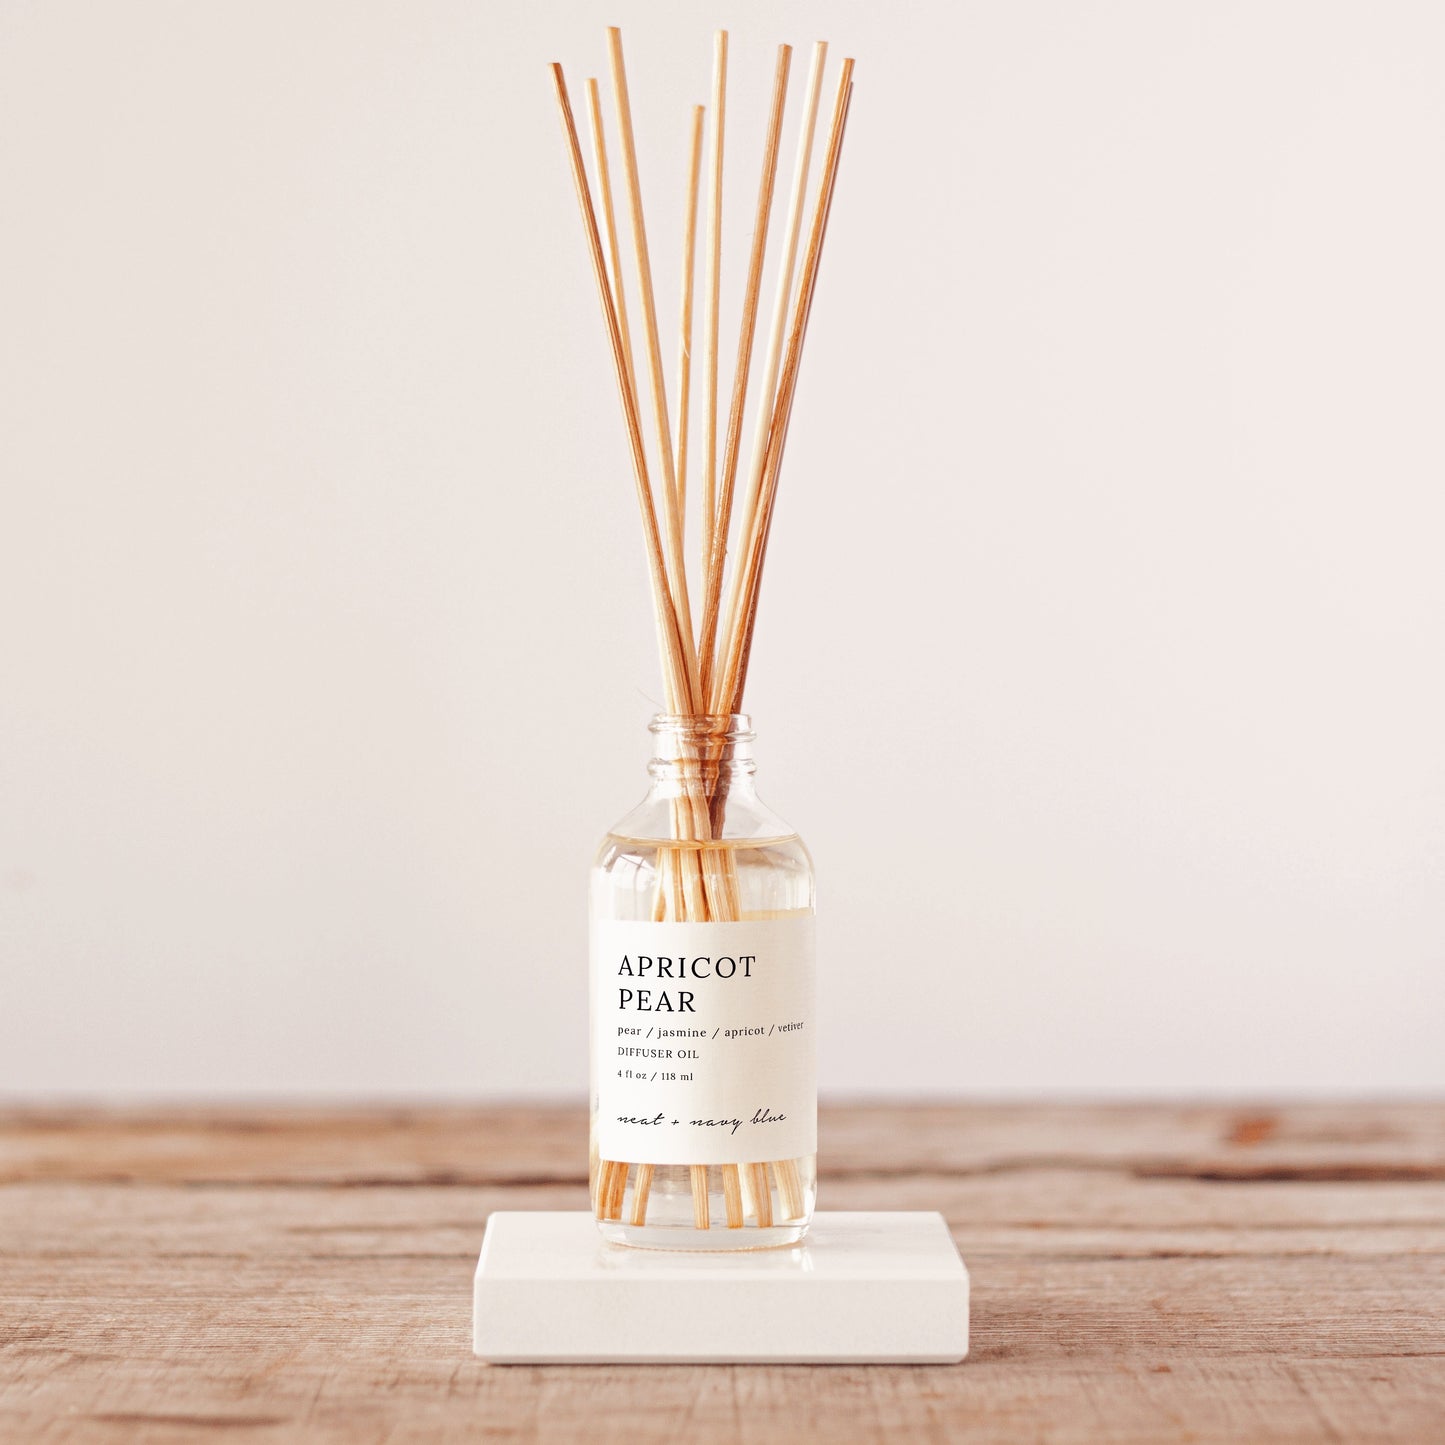 Apricot Pear Reed Diffuser